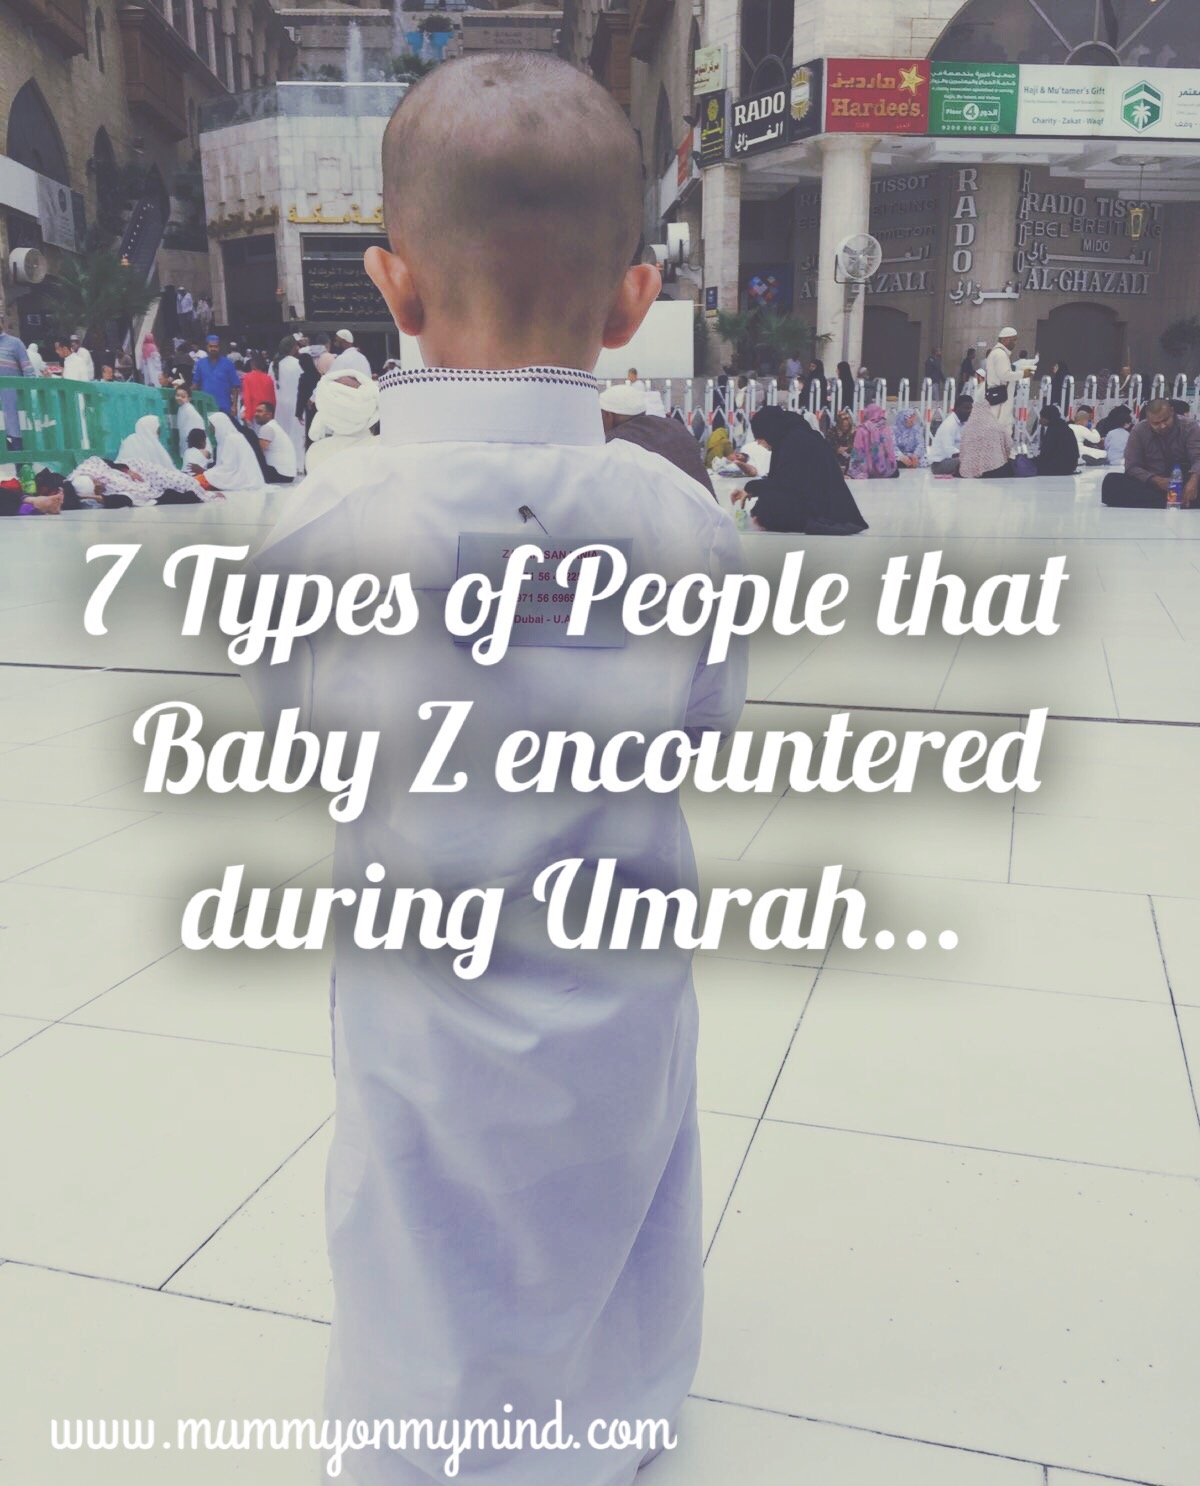 Seven Types of People that Baby Z encountered during Umrah…